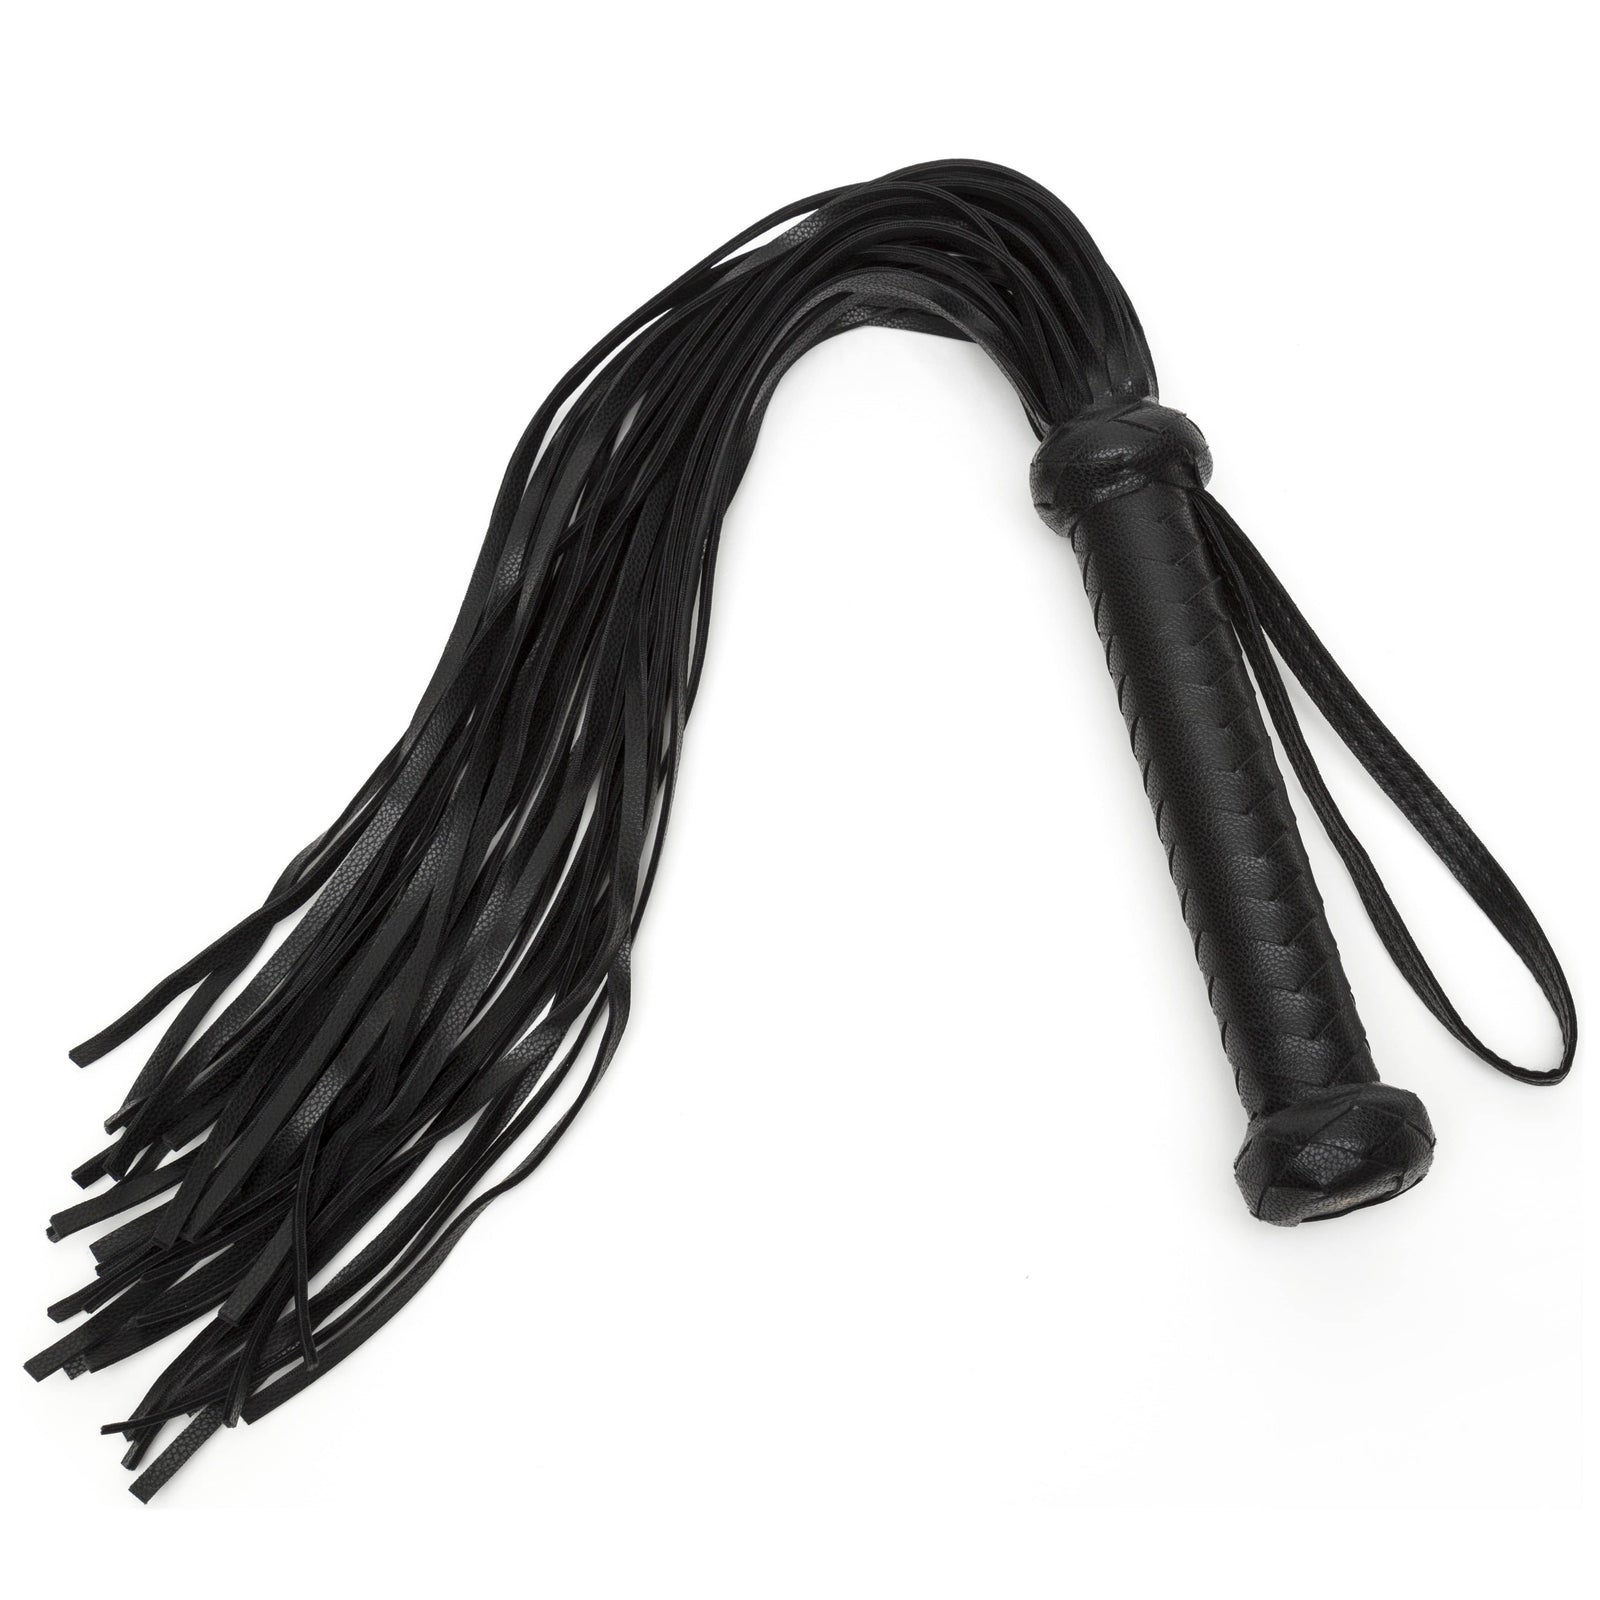 Fifty Shades of Grey - Bound to You Flogger (Black) Flogger 319733923 CherryAffairs